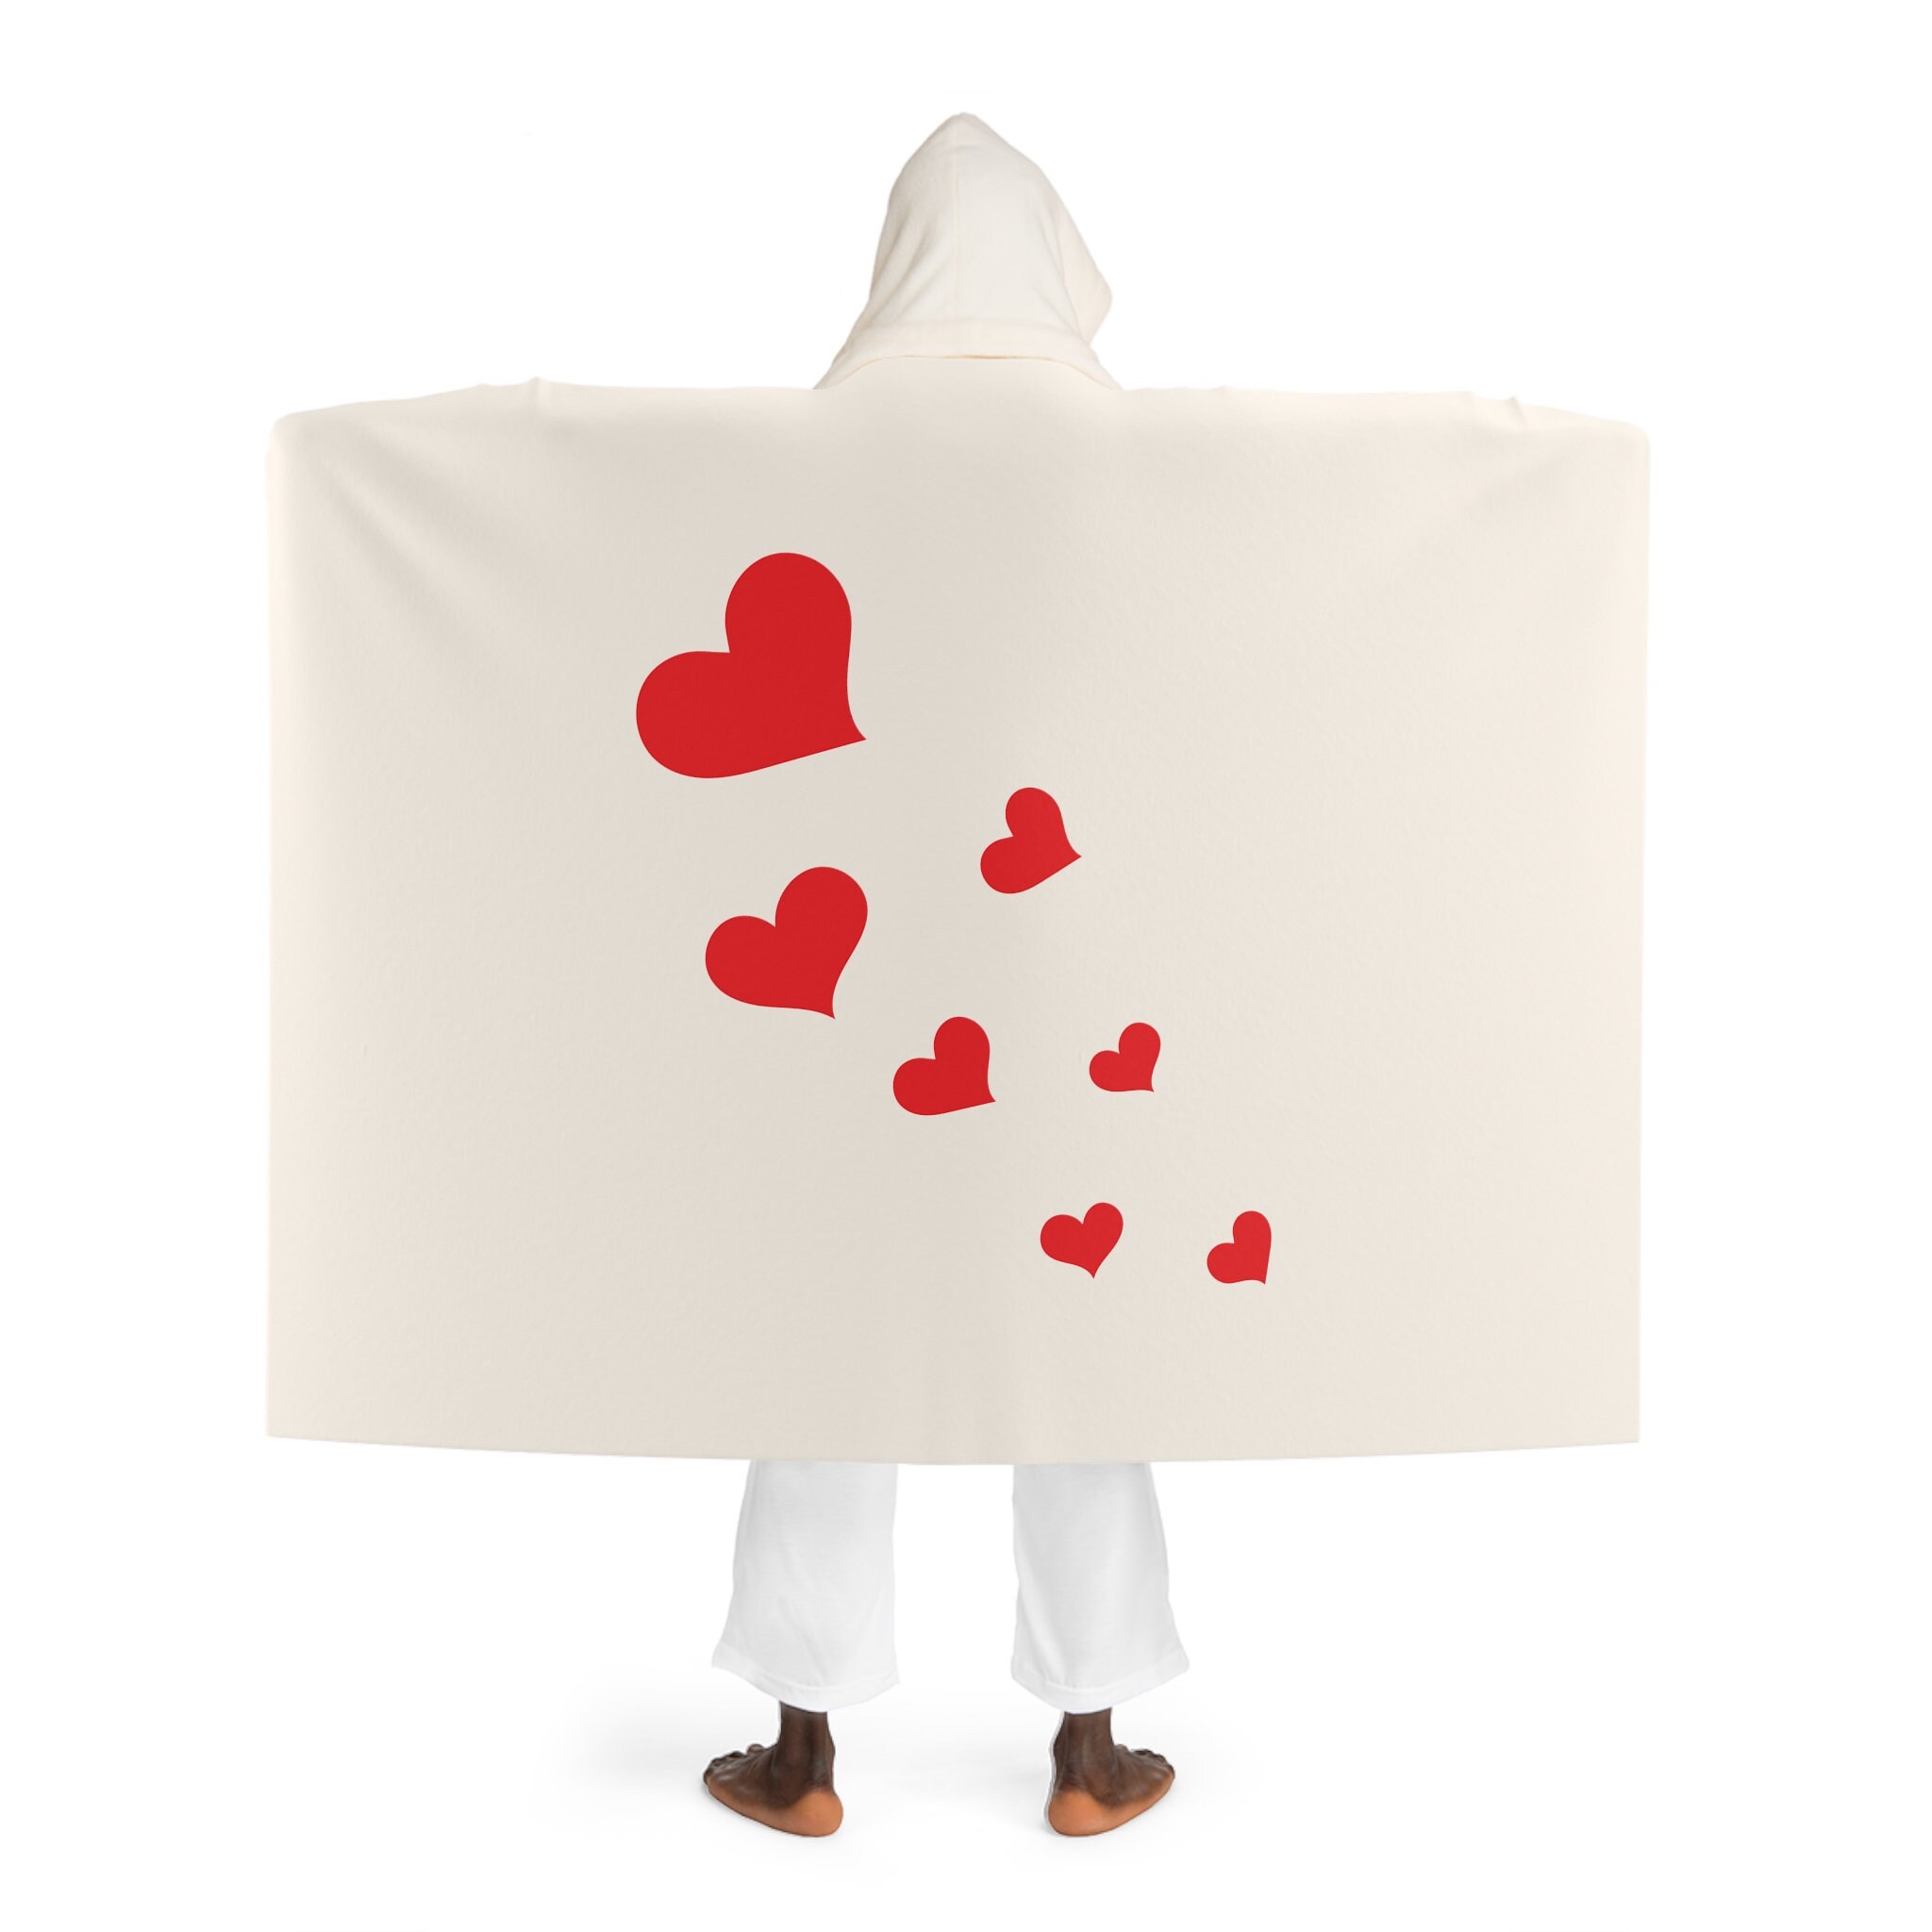 Discover Heart - Super Comfy And Warm Hooded Sherpa Fleece Blanket